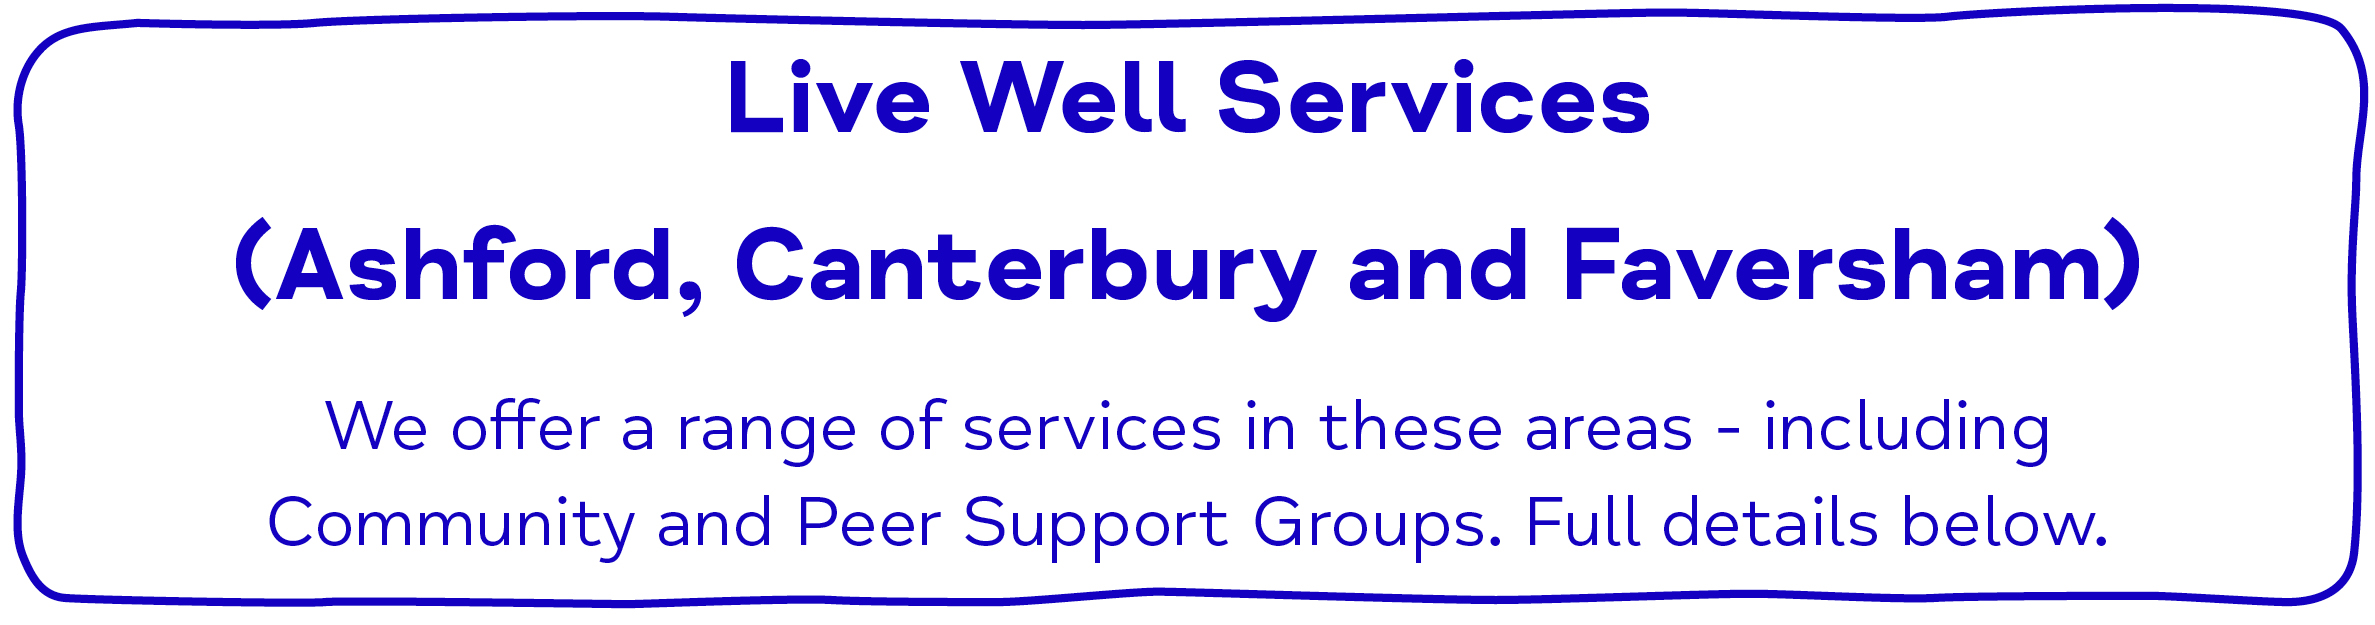 Live Well Services (Ashford, Canterbury and Faversham) We offer a range of services in these areas - including Community and Peer Support Groups. Full details below.